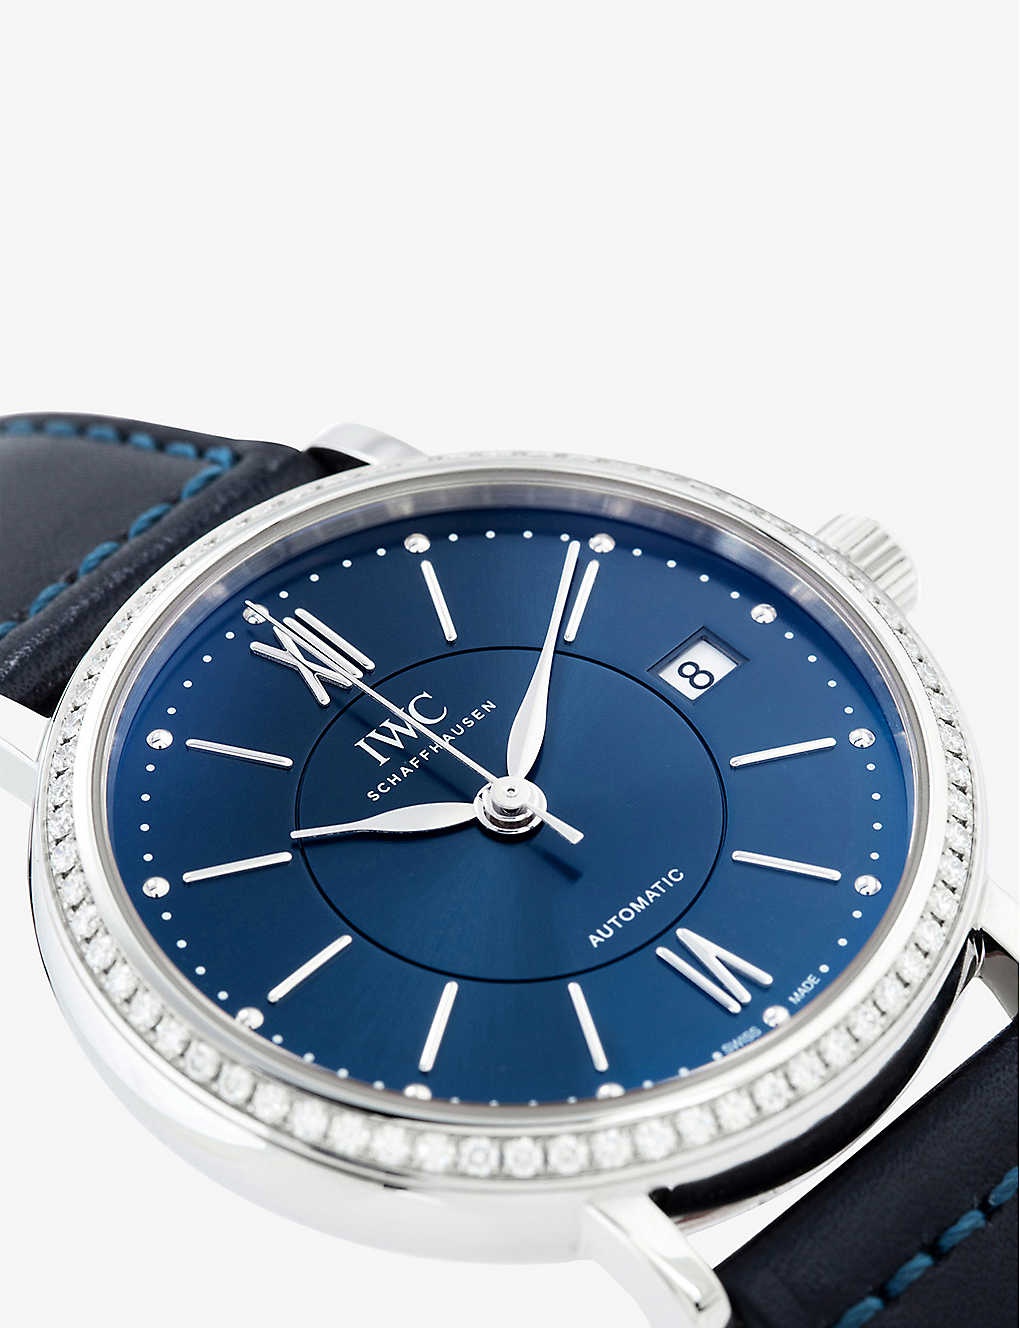 IW458111 Portofino stainless-steel, diamond and leather automatic watch - 2